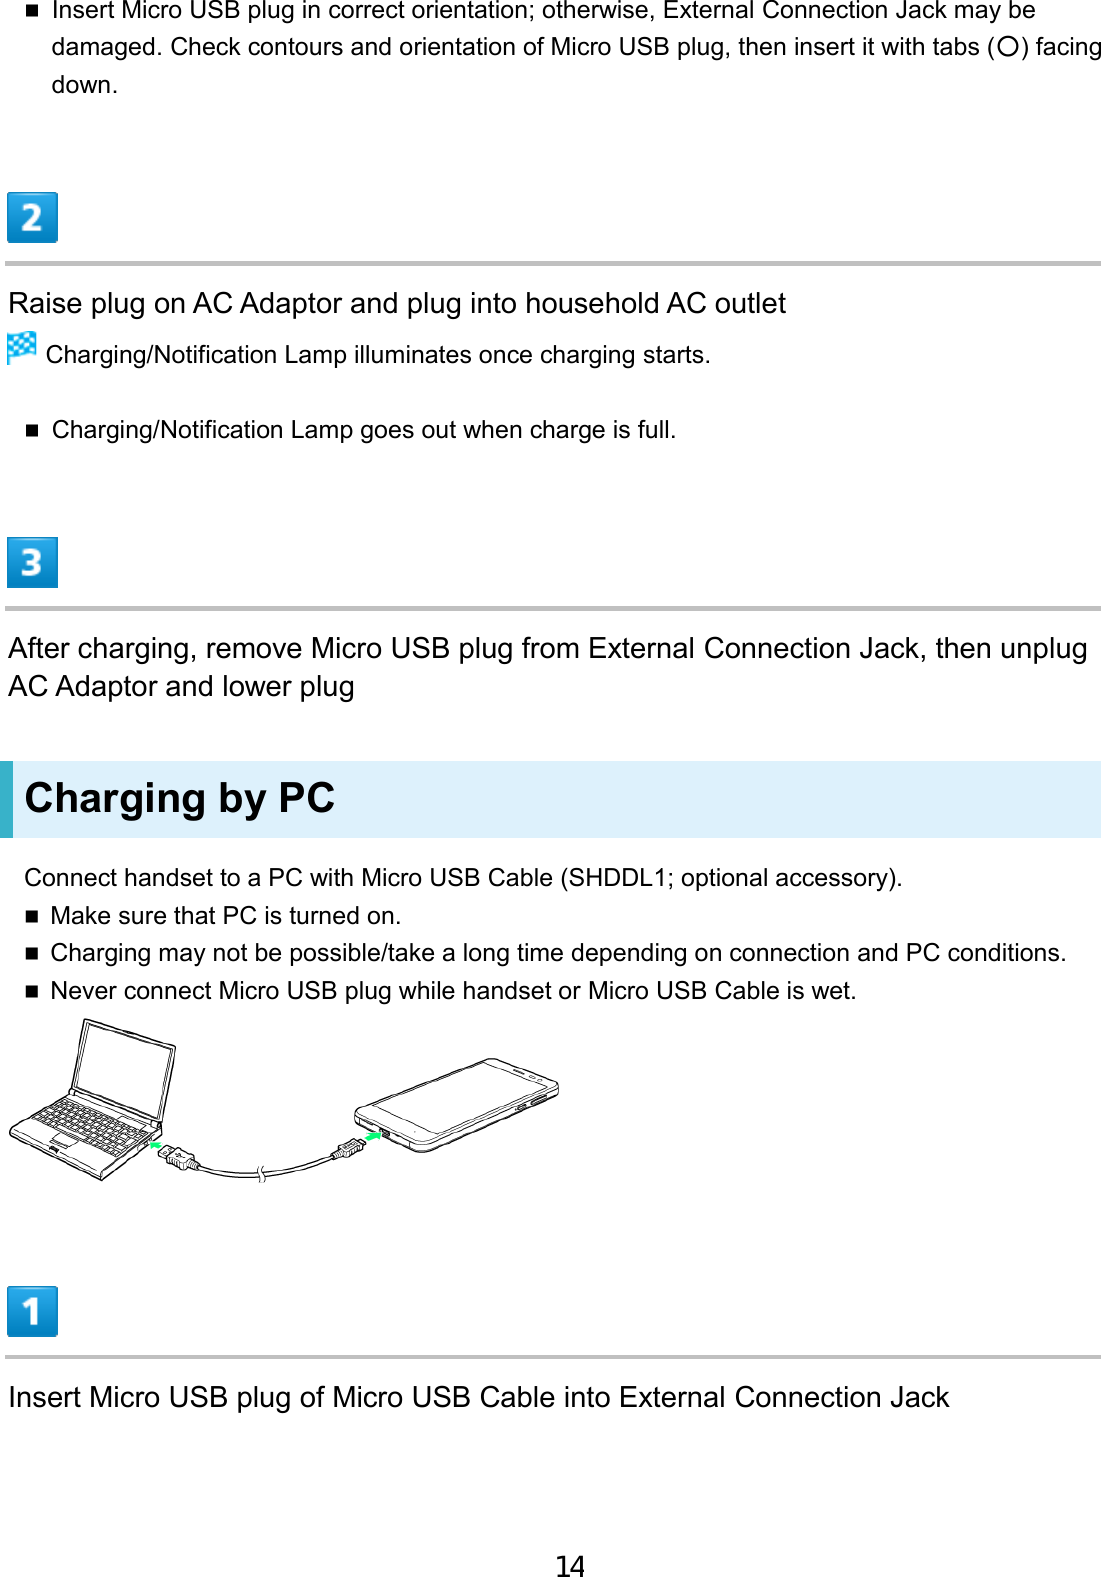 Insert Micro USB plug in correct orientation; otherwise, External Connection Jack may bedamaged. Check contours and orientation of Micro USB plug, then insert it with tabs (○) facingdown.Raise plug on AC Adaptor and plug into household AC outlet  Charging/Notification Lamp illuminates once charging starts. Charging/Notification Lamp goes out when charge is full.After charging, remove Micro USB plug from External Connection Jack, then unplug AC Adaptor and lower plug Charging by PC Connect handset to a PC with Micro USB Cable (SHDDL1; optional accessory). Make sure that PC is turned on.Charging may not be possible/take a long time depending on connection and PC conditions.Never connect Micro USB plug while handset or Micro USB Cable is wet.Insert Micro USB plug of Micro USB Cable into External Connection Jack 14